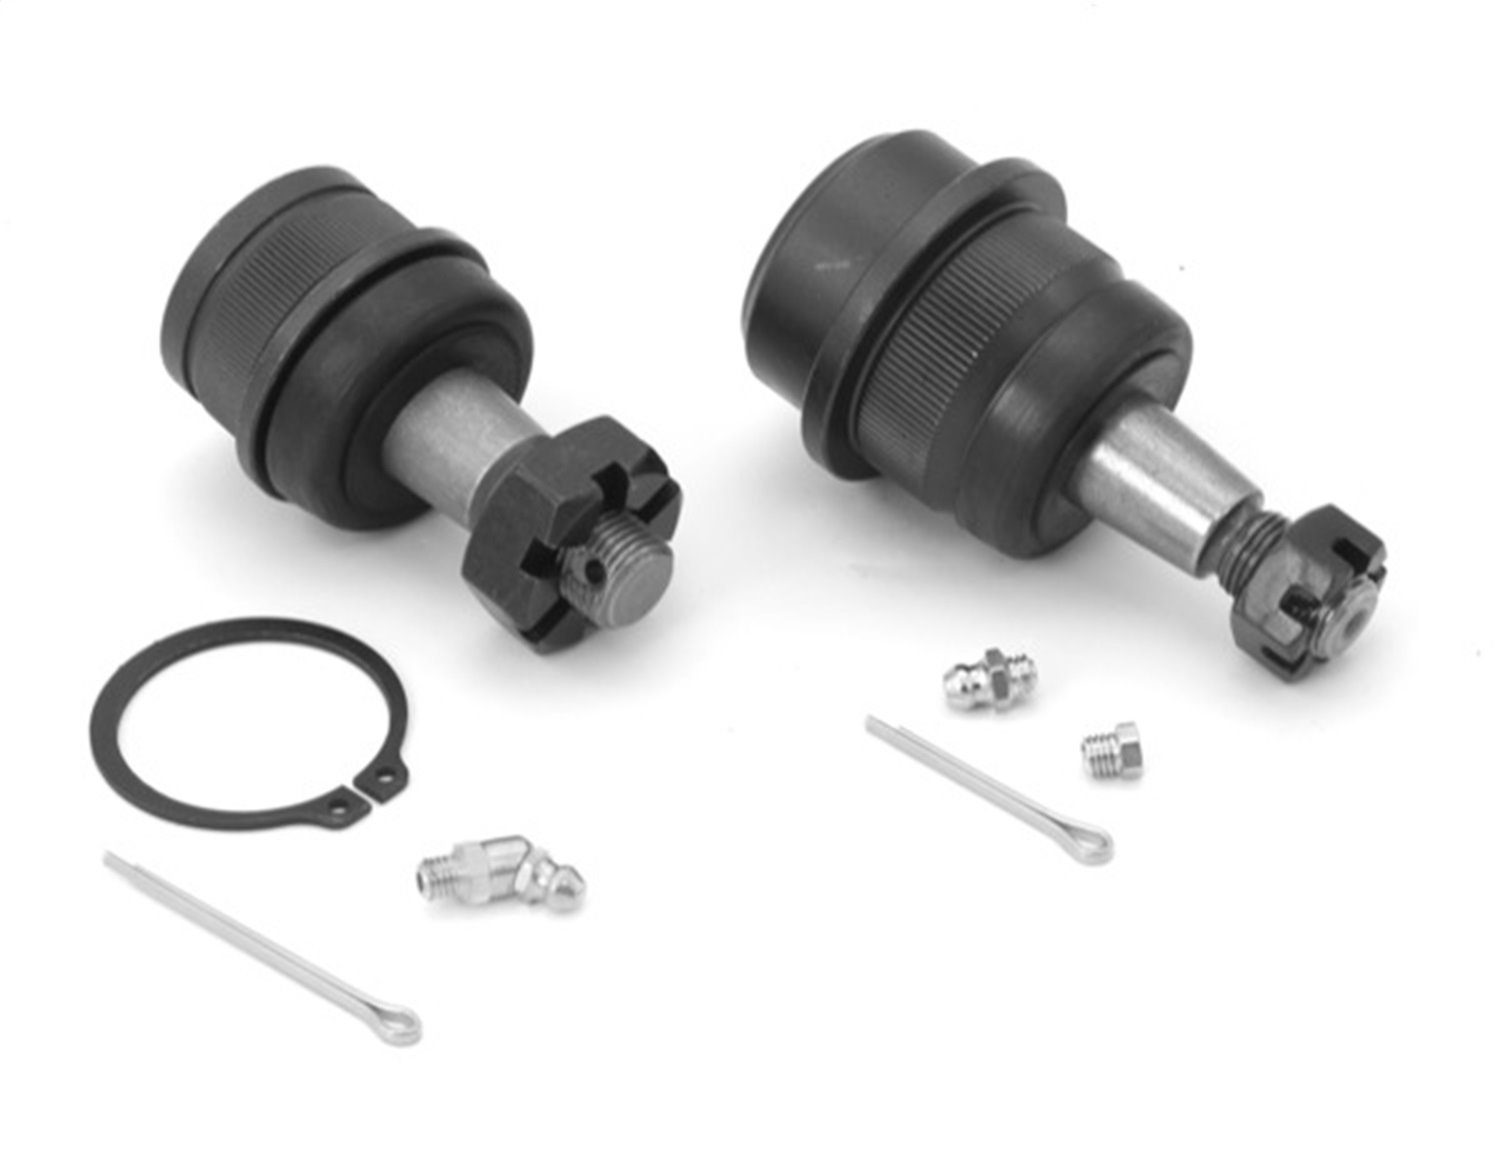 This Ball Joint kit from Omix-ADA with Dana